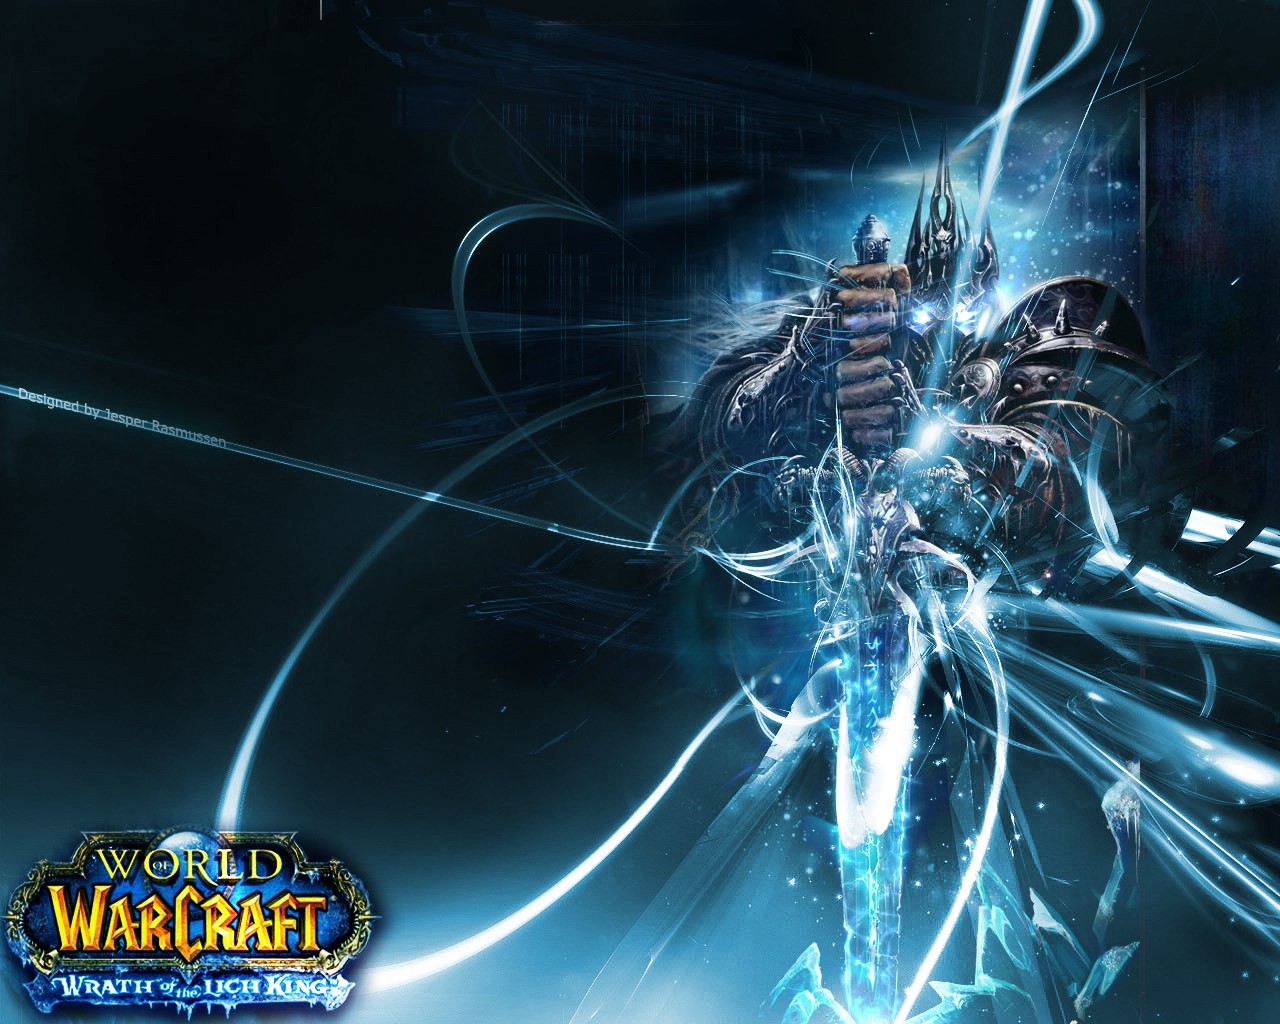 World Of Warcraft, World Of Warcraft: Wrath Of The Lich King Wallpaper